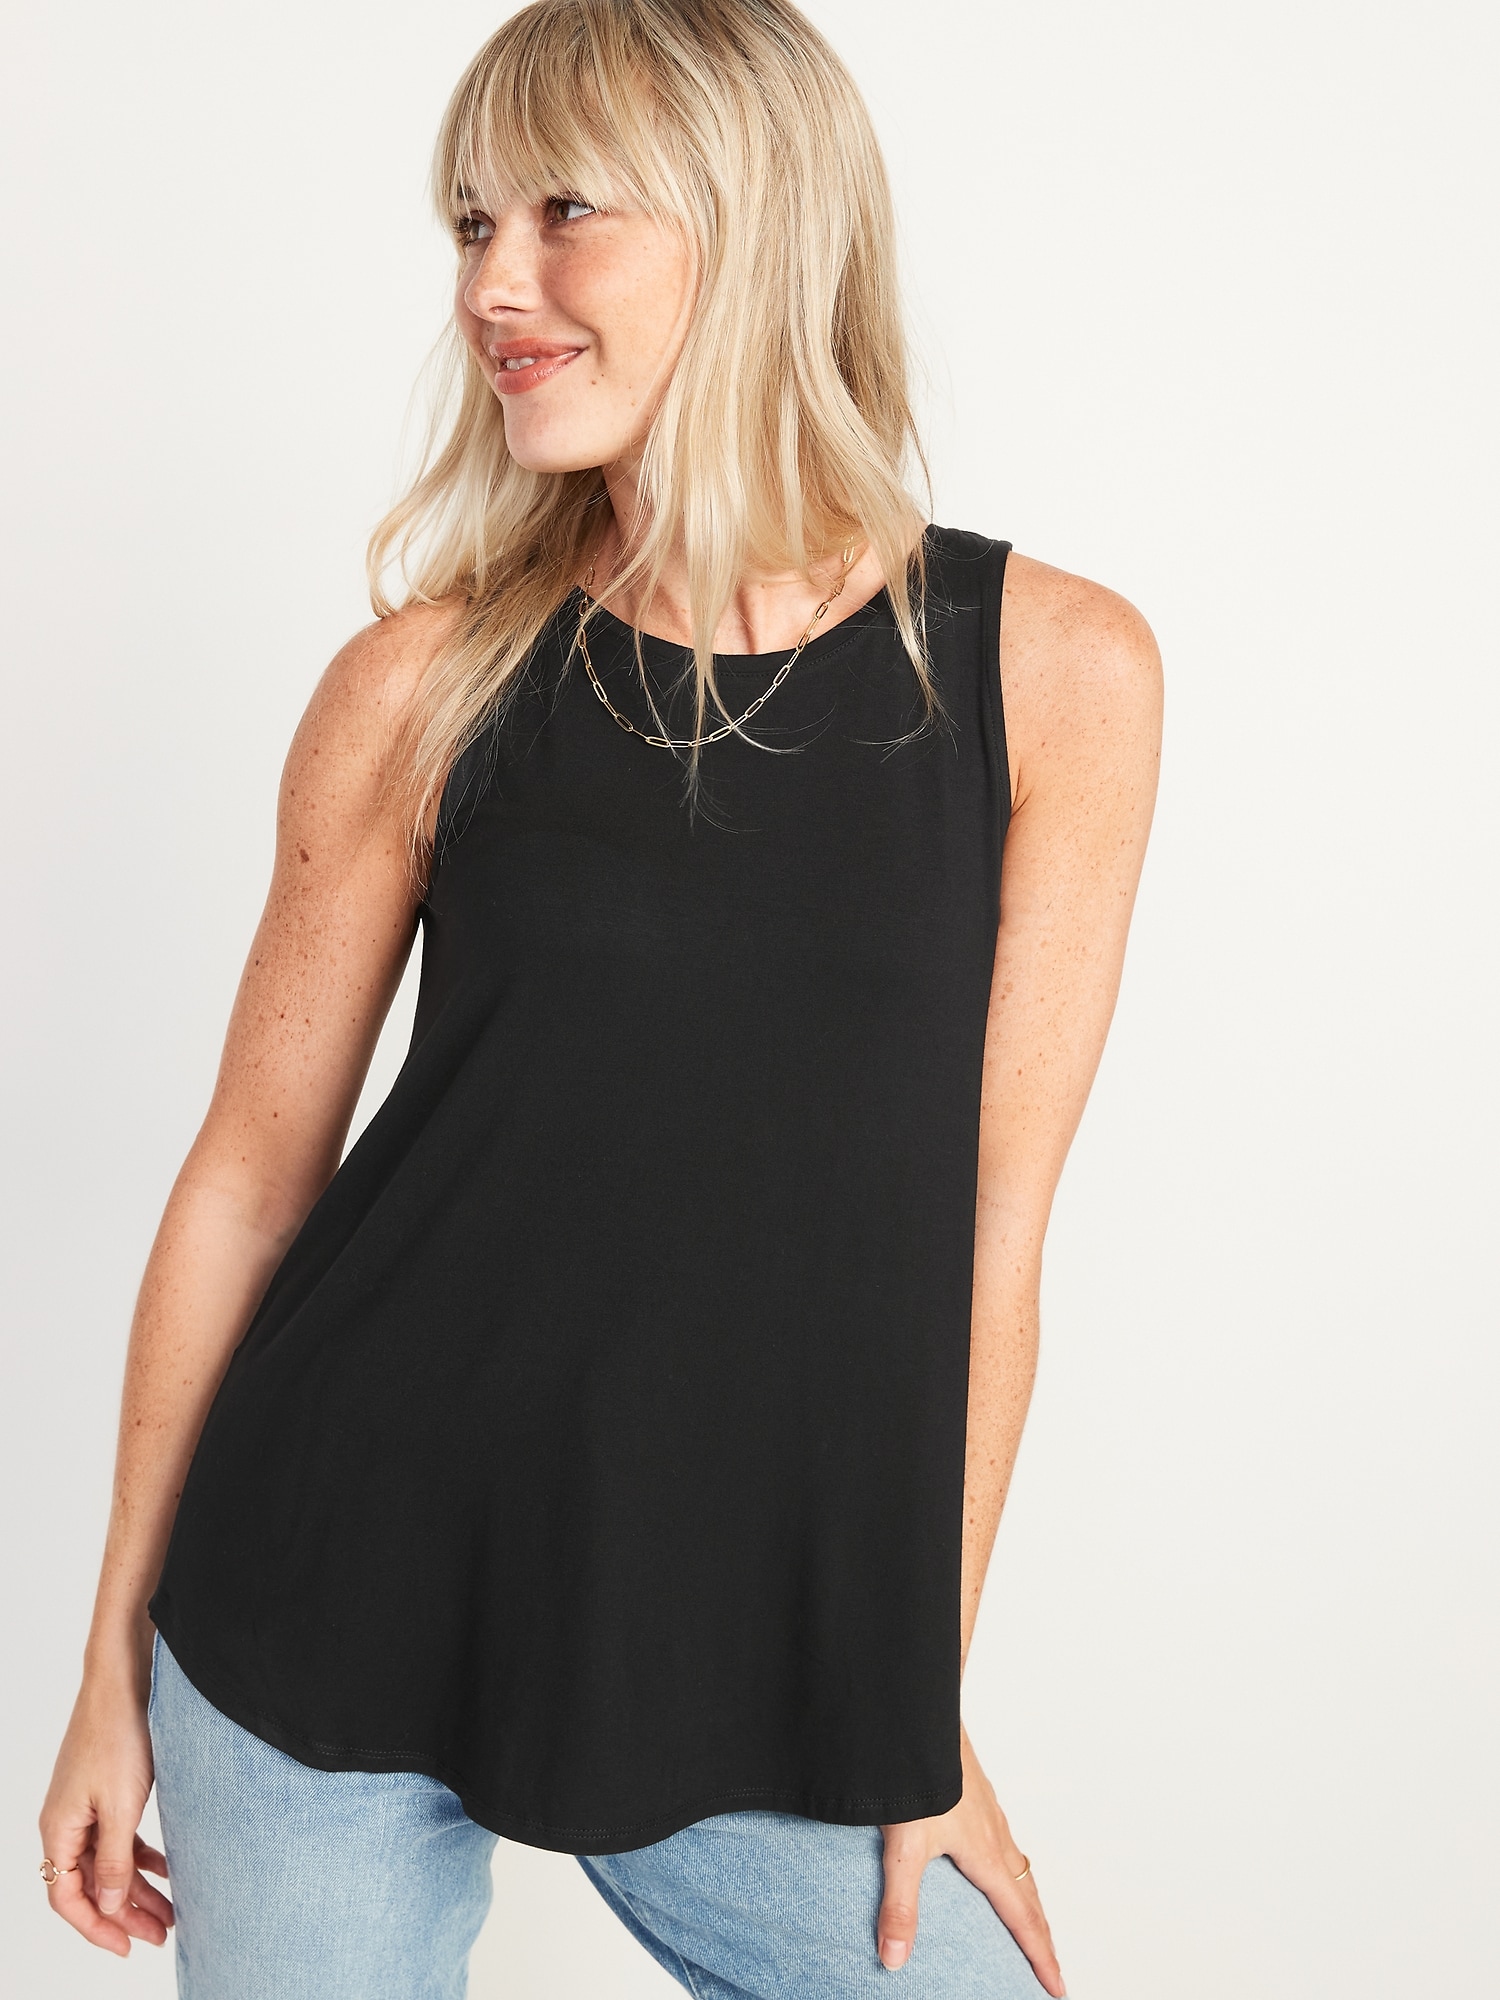 Armani Exchange Sleeveless Top With Lace Insert in Black Womens Clothing Tops Sleeveless and tank tops 